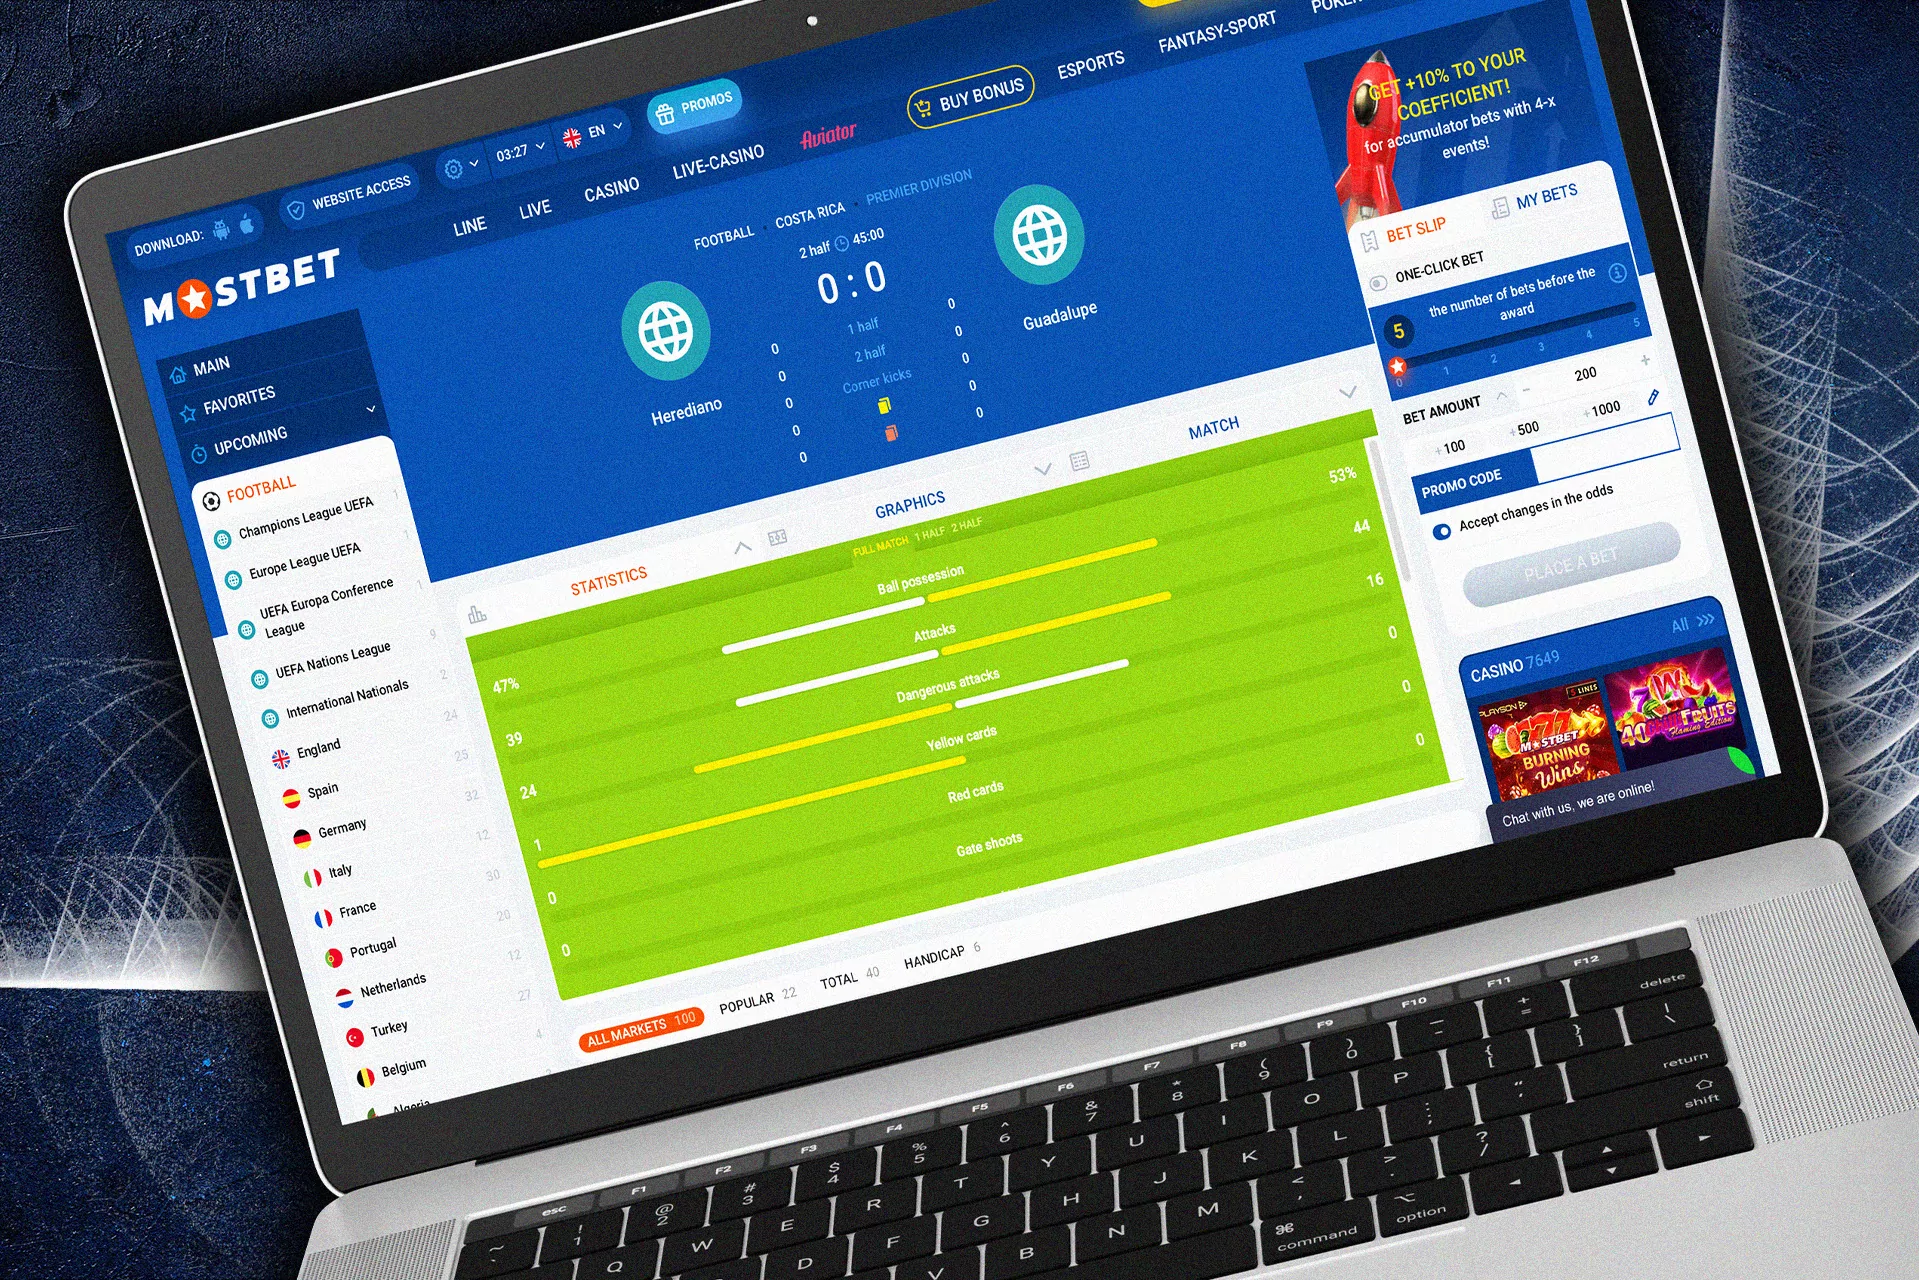 At Mostbet you can watch your results and statistics of your games.